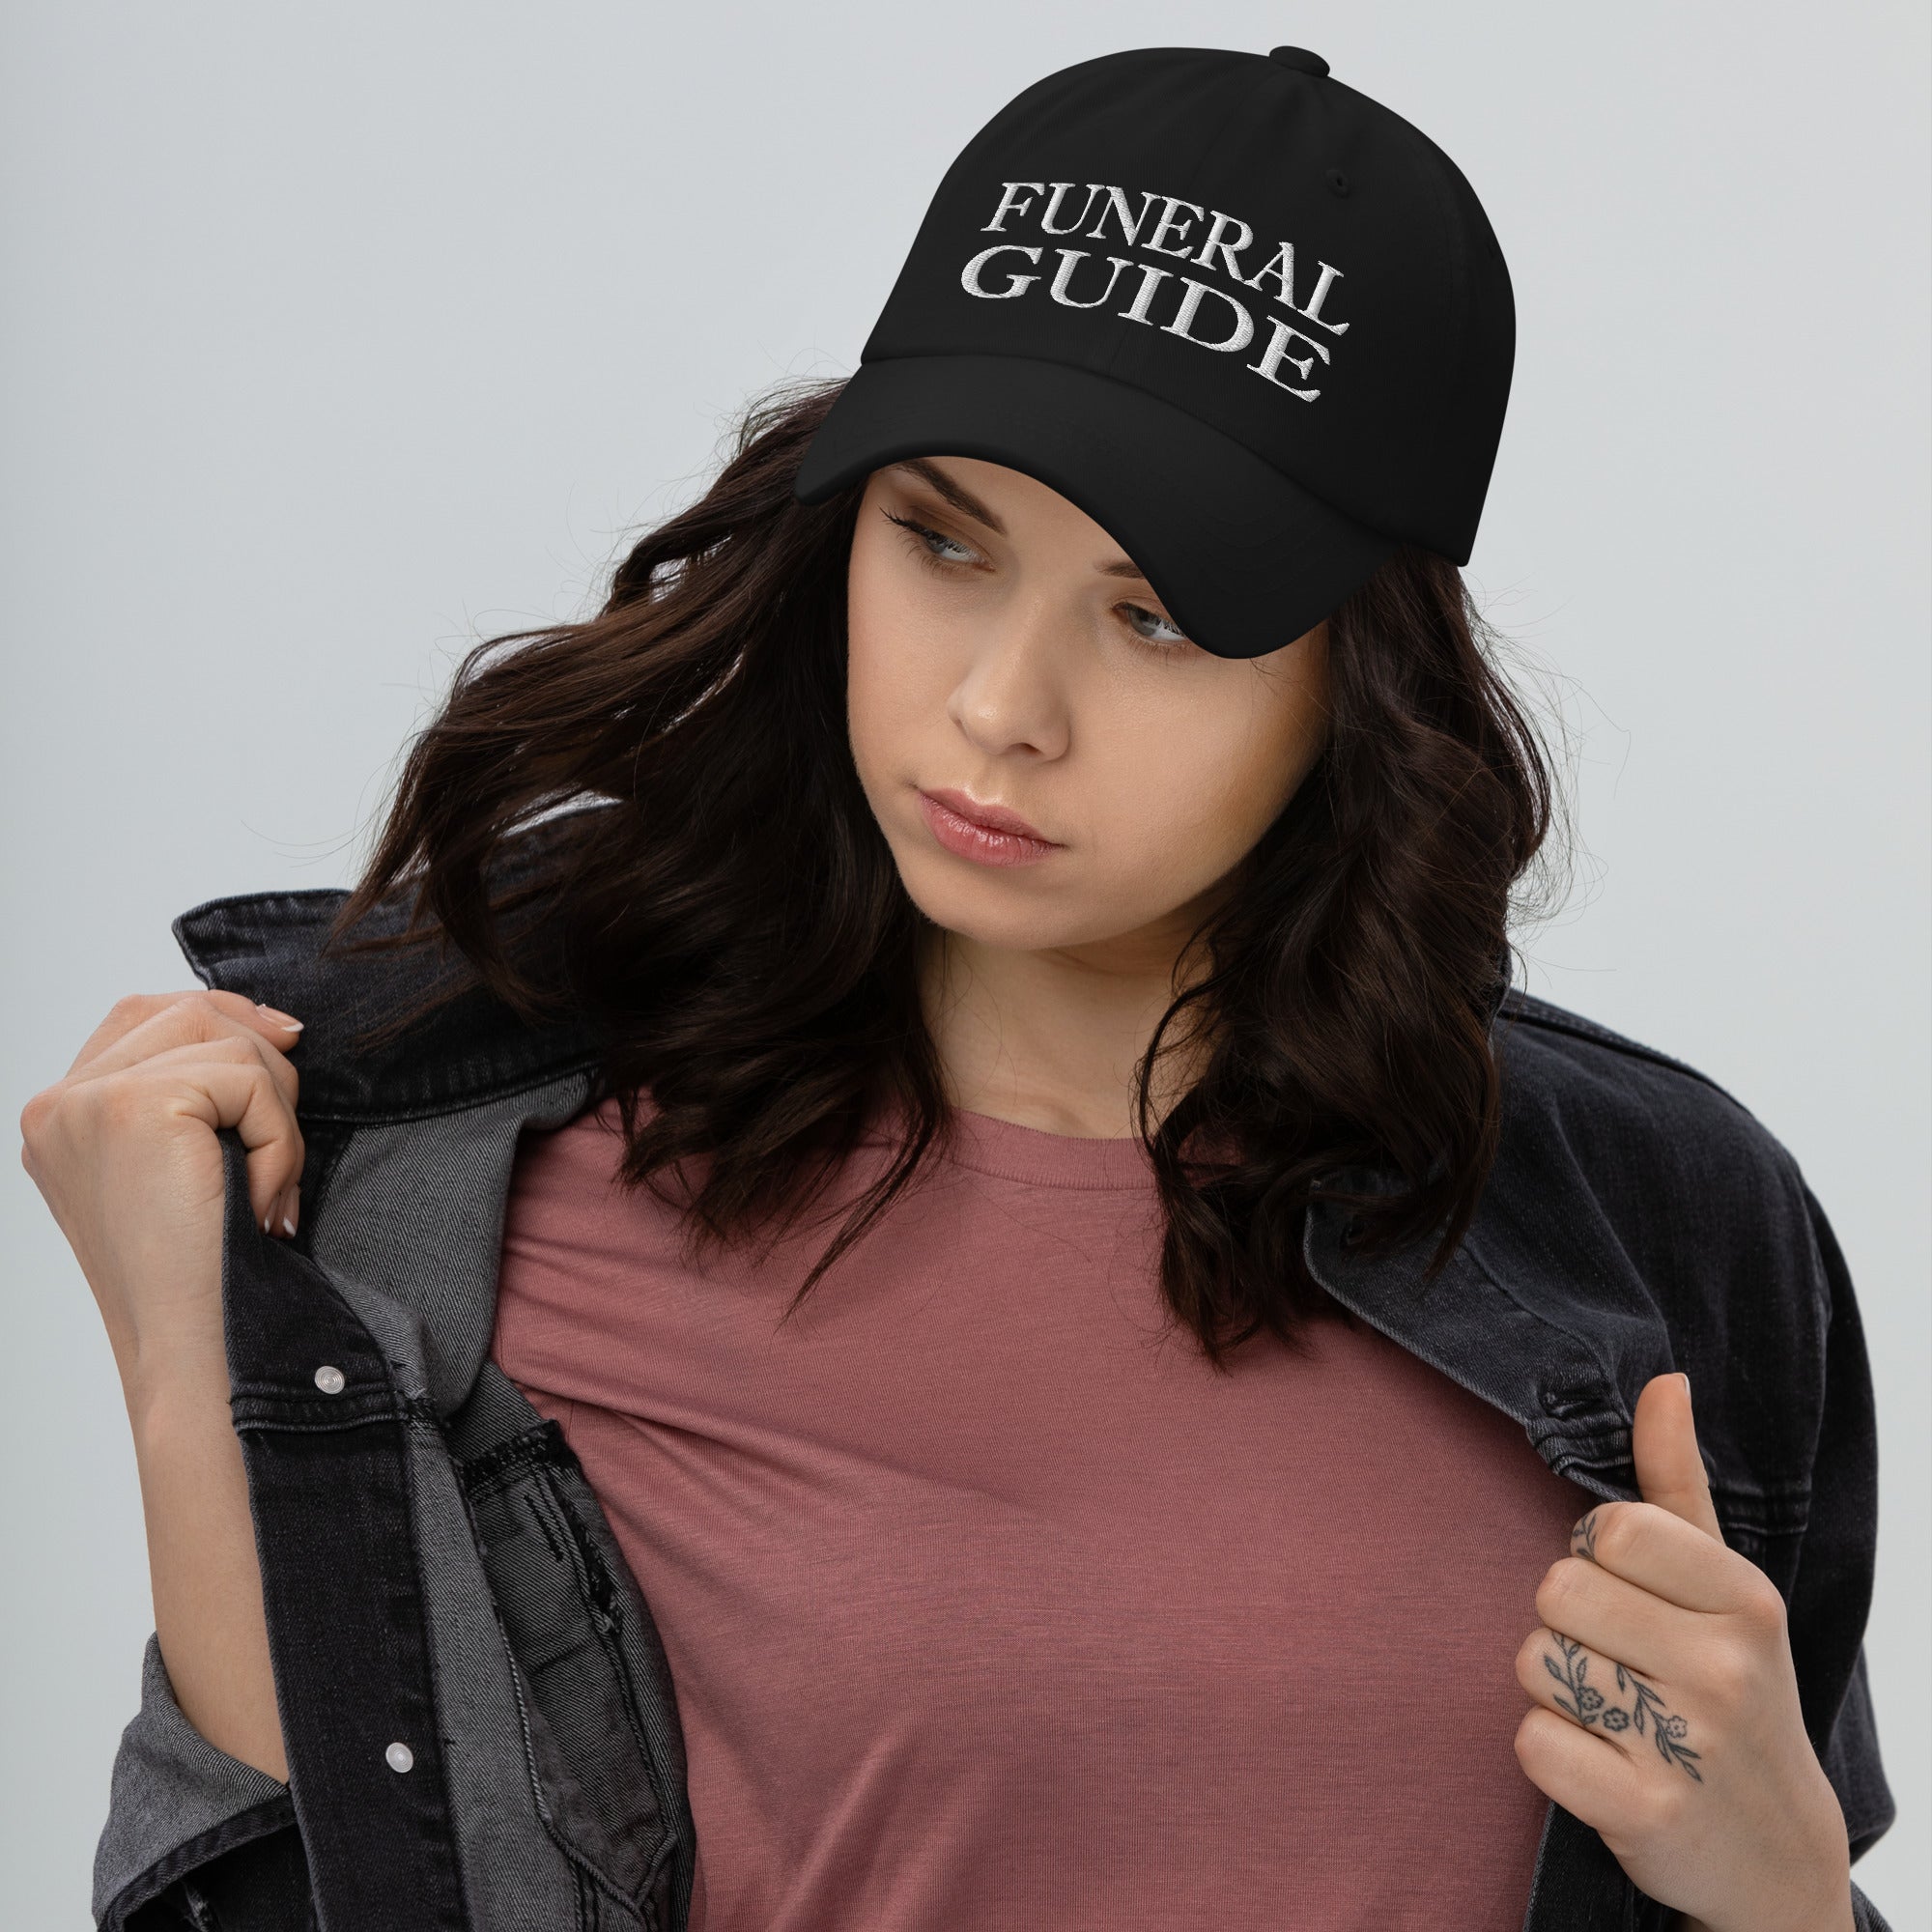 Funeral Guide Embroidered Baseball Cap Death Cosplay Dad hat - Edge of Life Designs